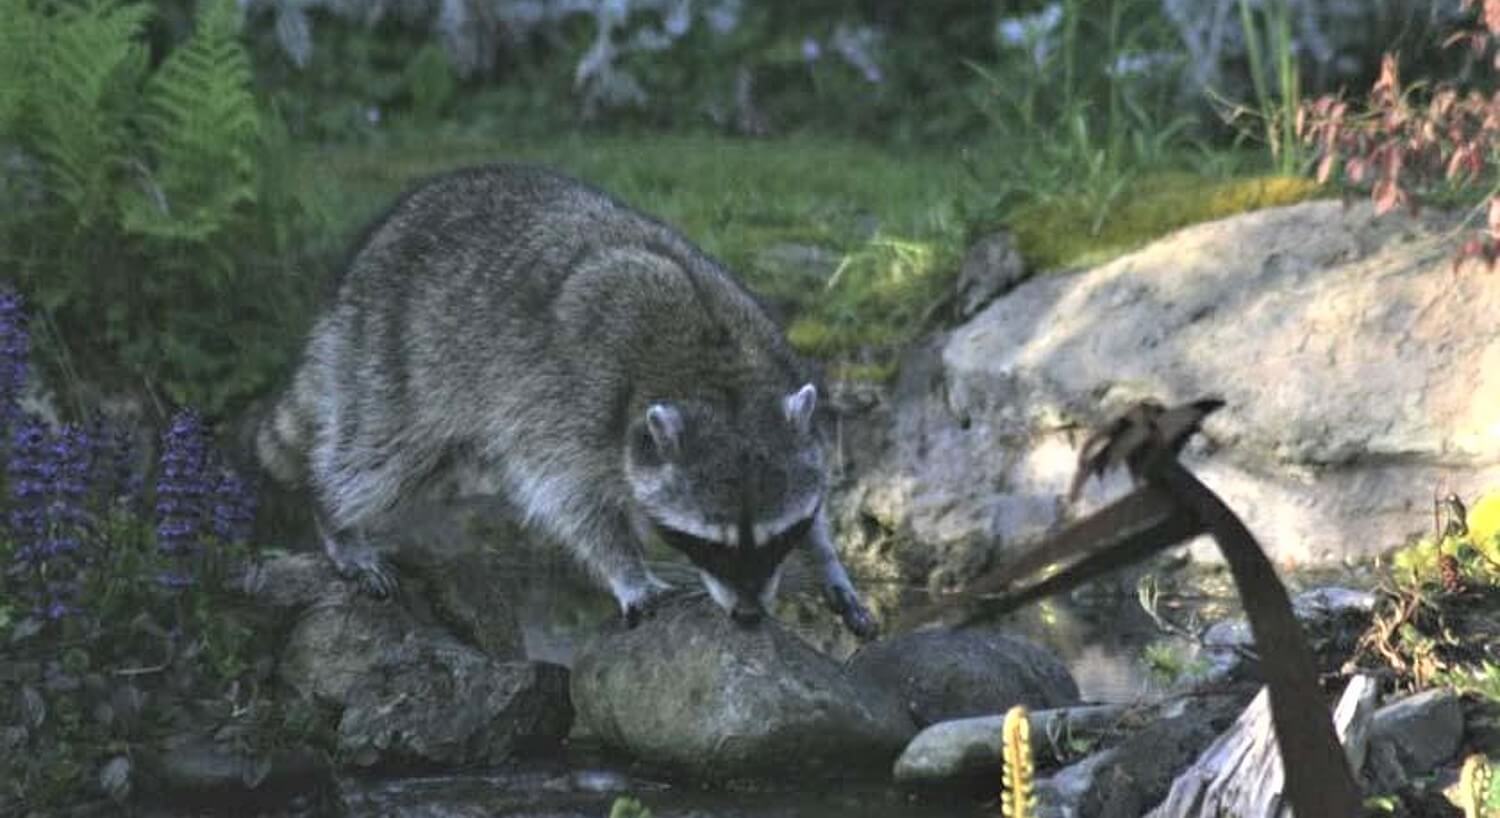  Large raccoon leaning over some rocks near a small pond surrounded with flowers and grass